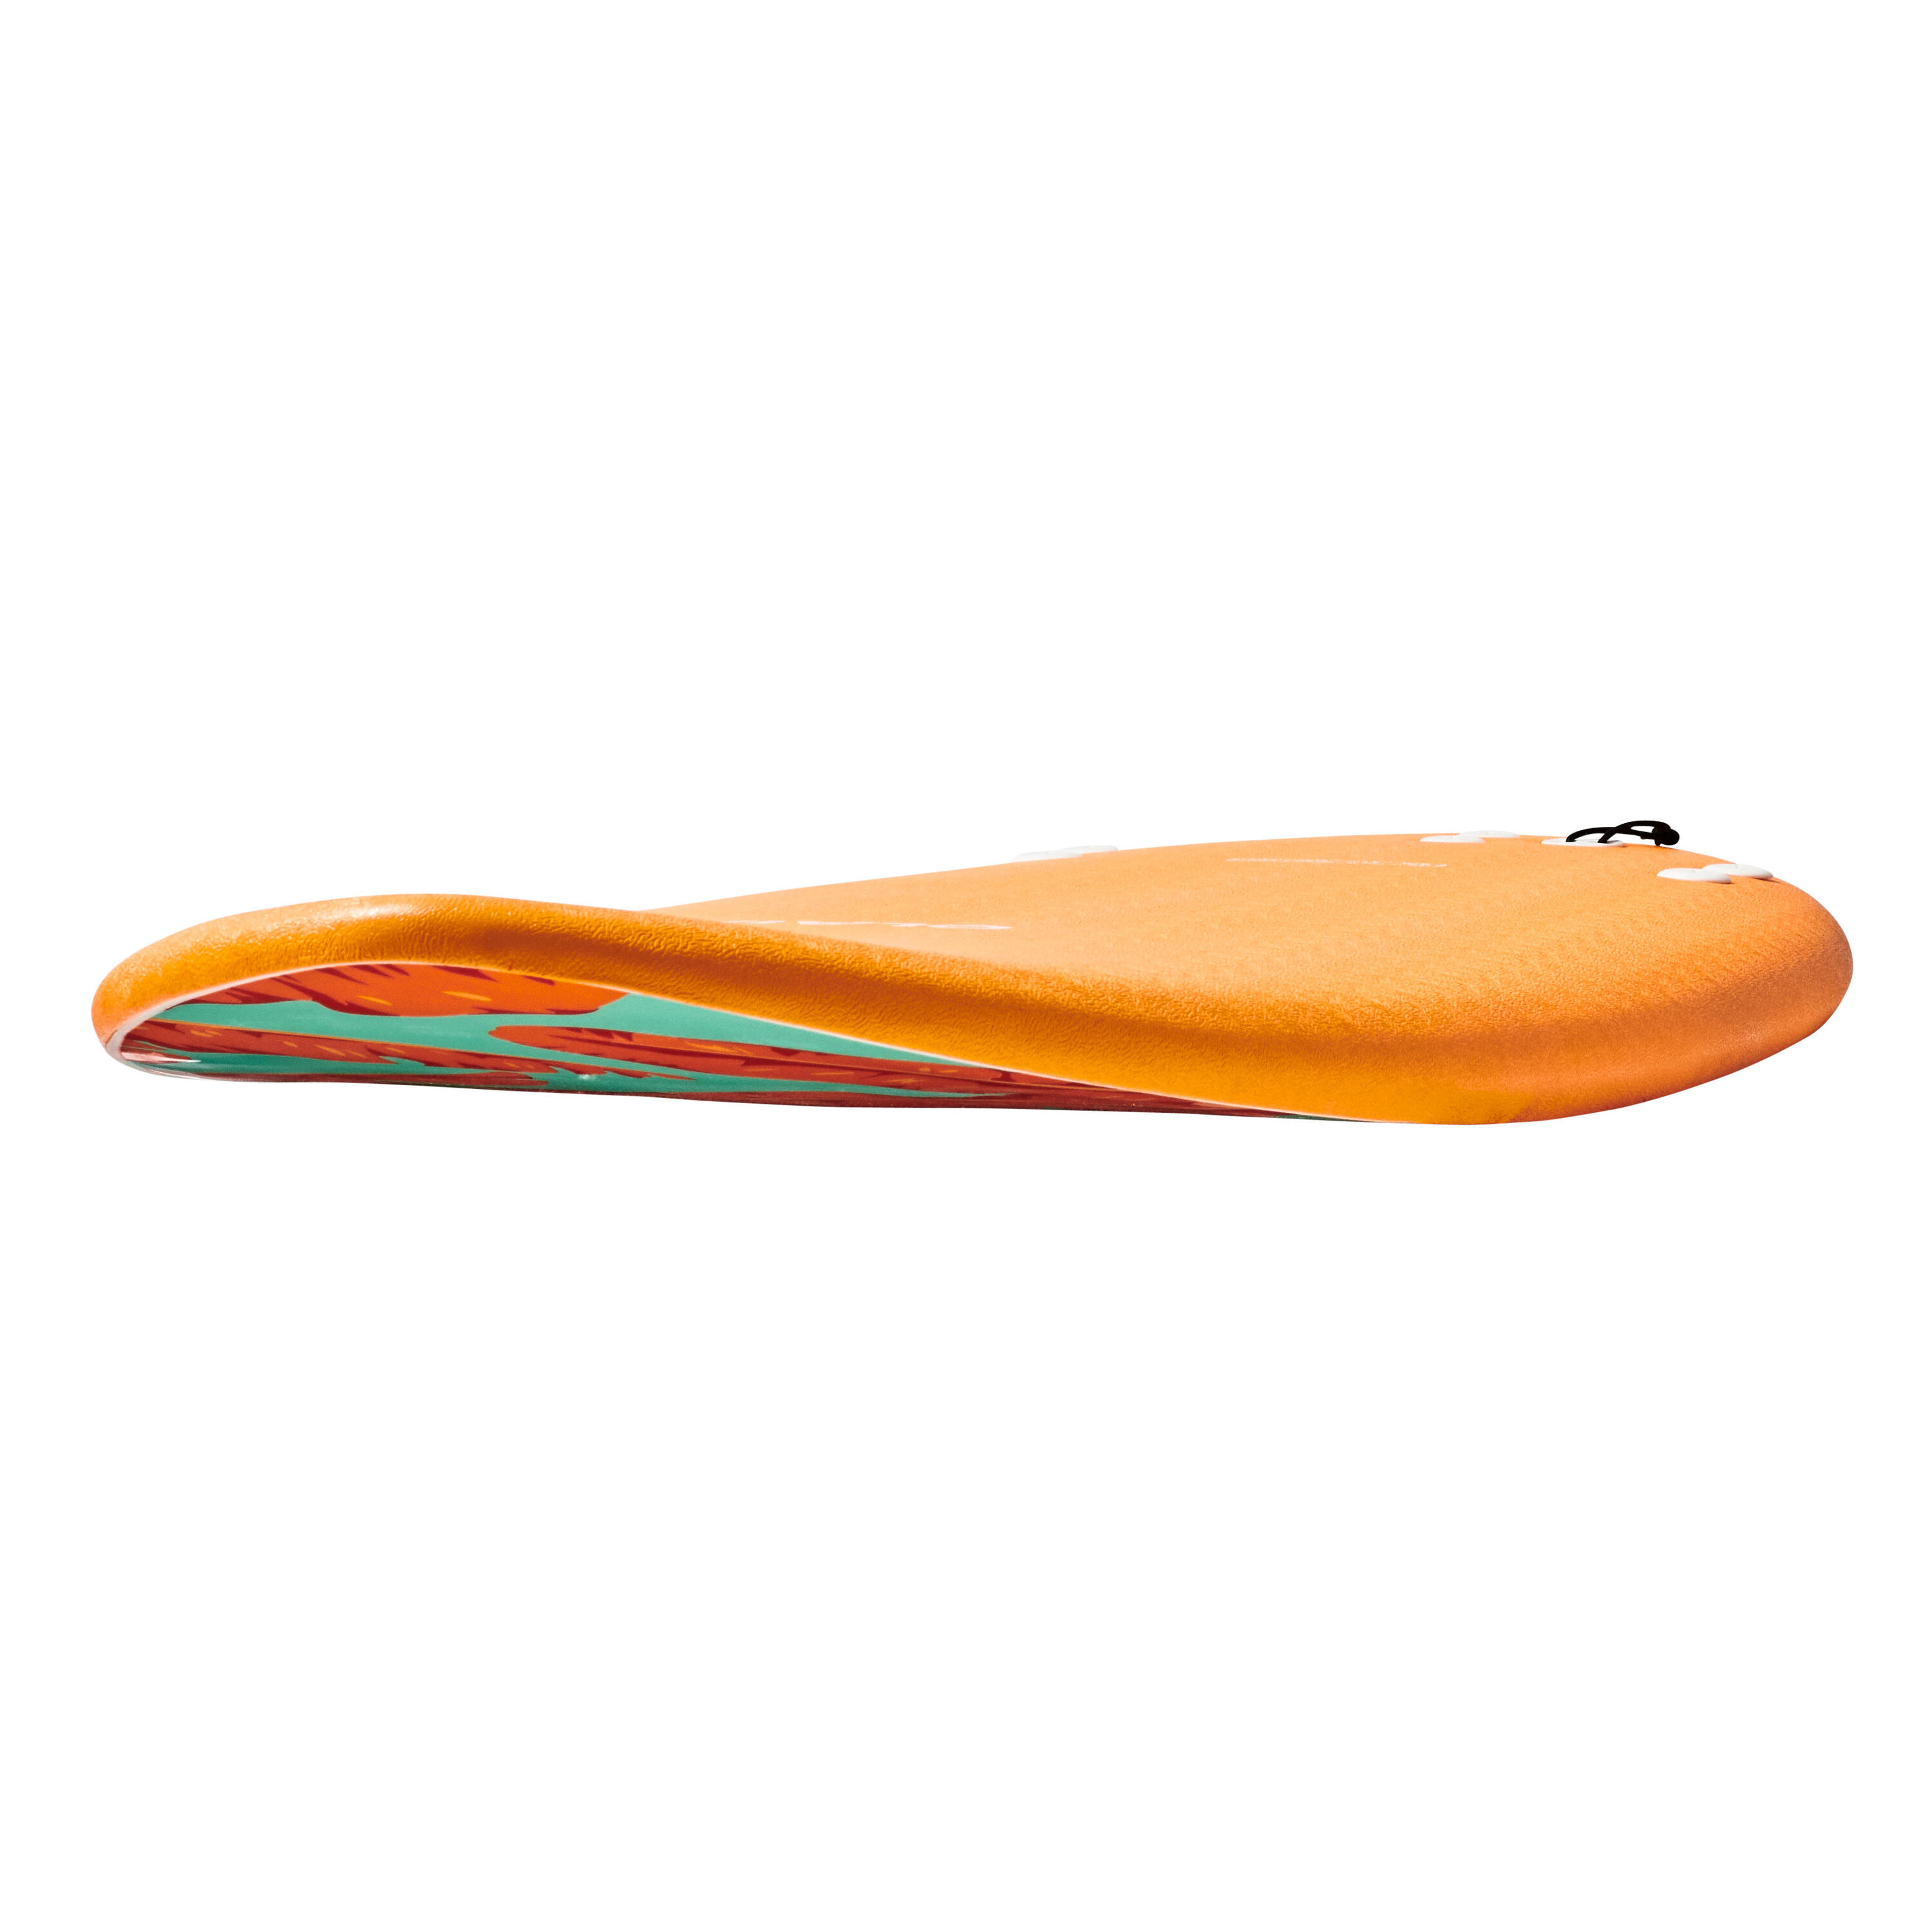 FOAM SURFBOARD 500 6'. Supplied with 1 leash and 3 fins. 10/13